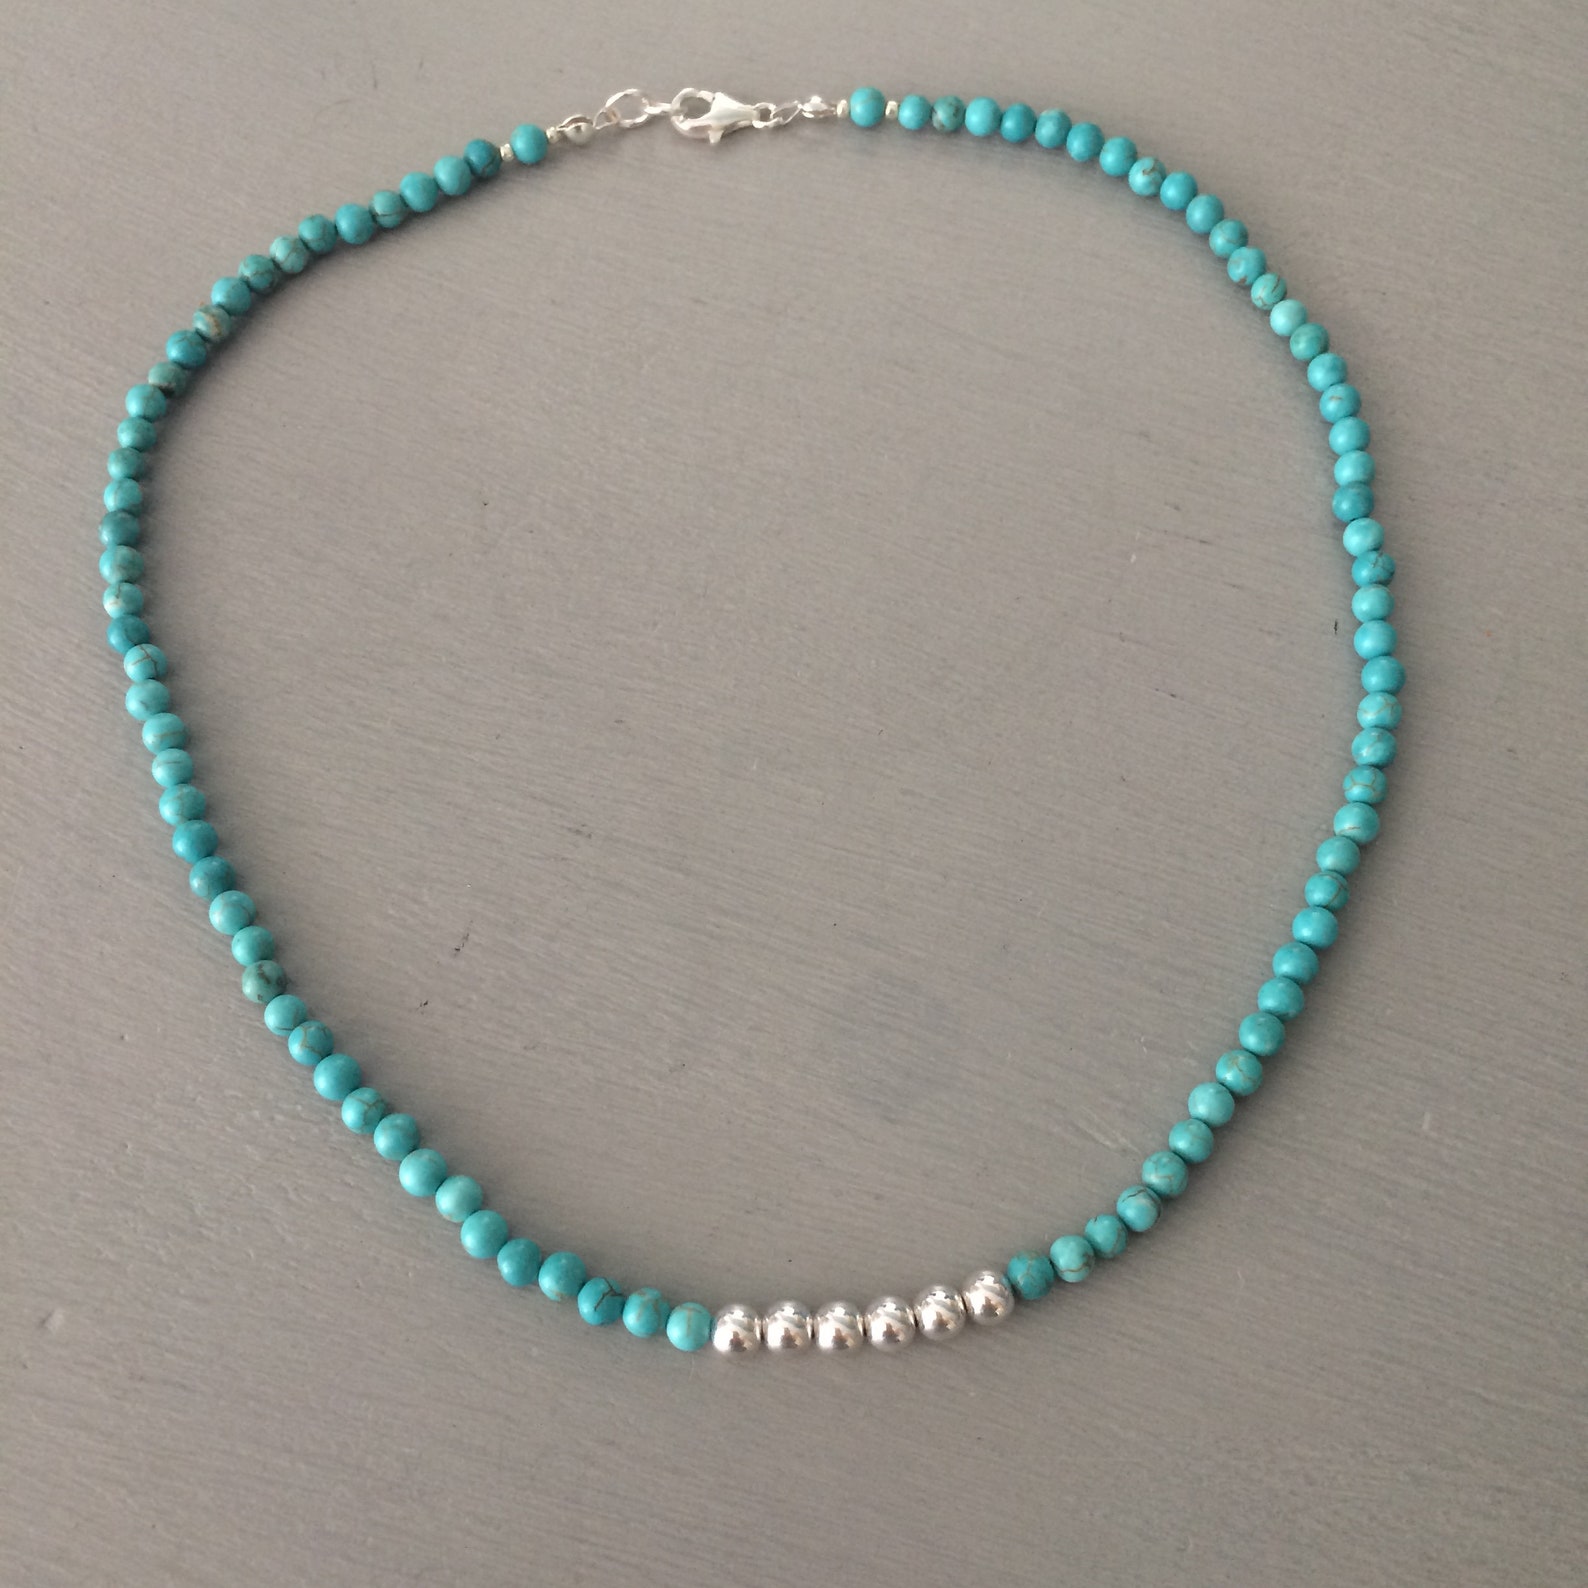 Turquoise Necklace Choker K Gold Fill Or Sterling Silver Etsy Uk